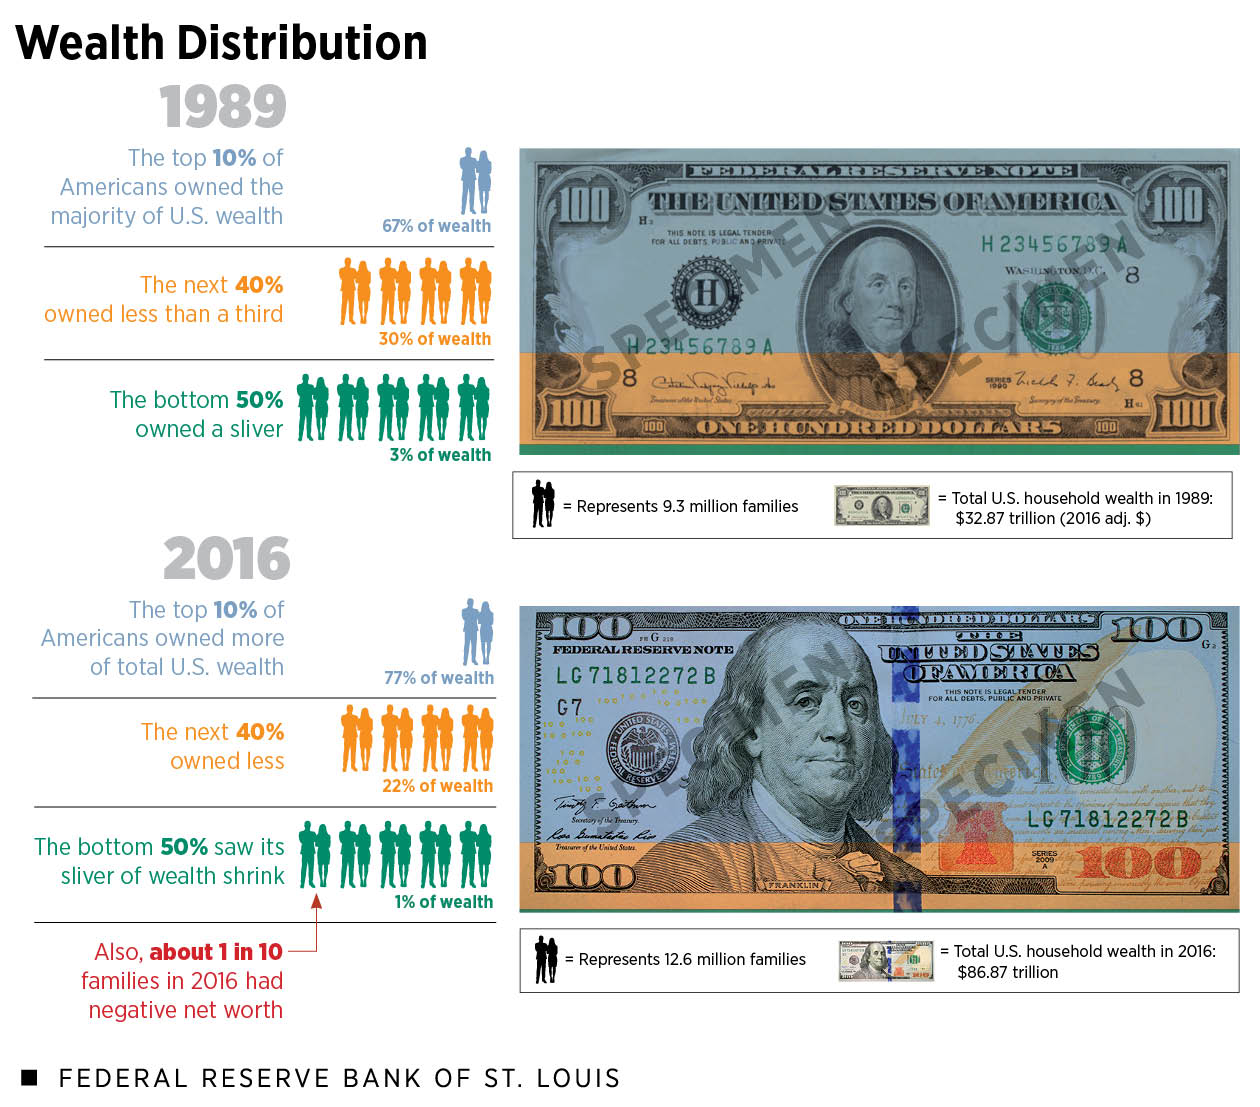 Infographic: U.S. Wealth Distribution - Who Owns the Most? (Details in article).